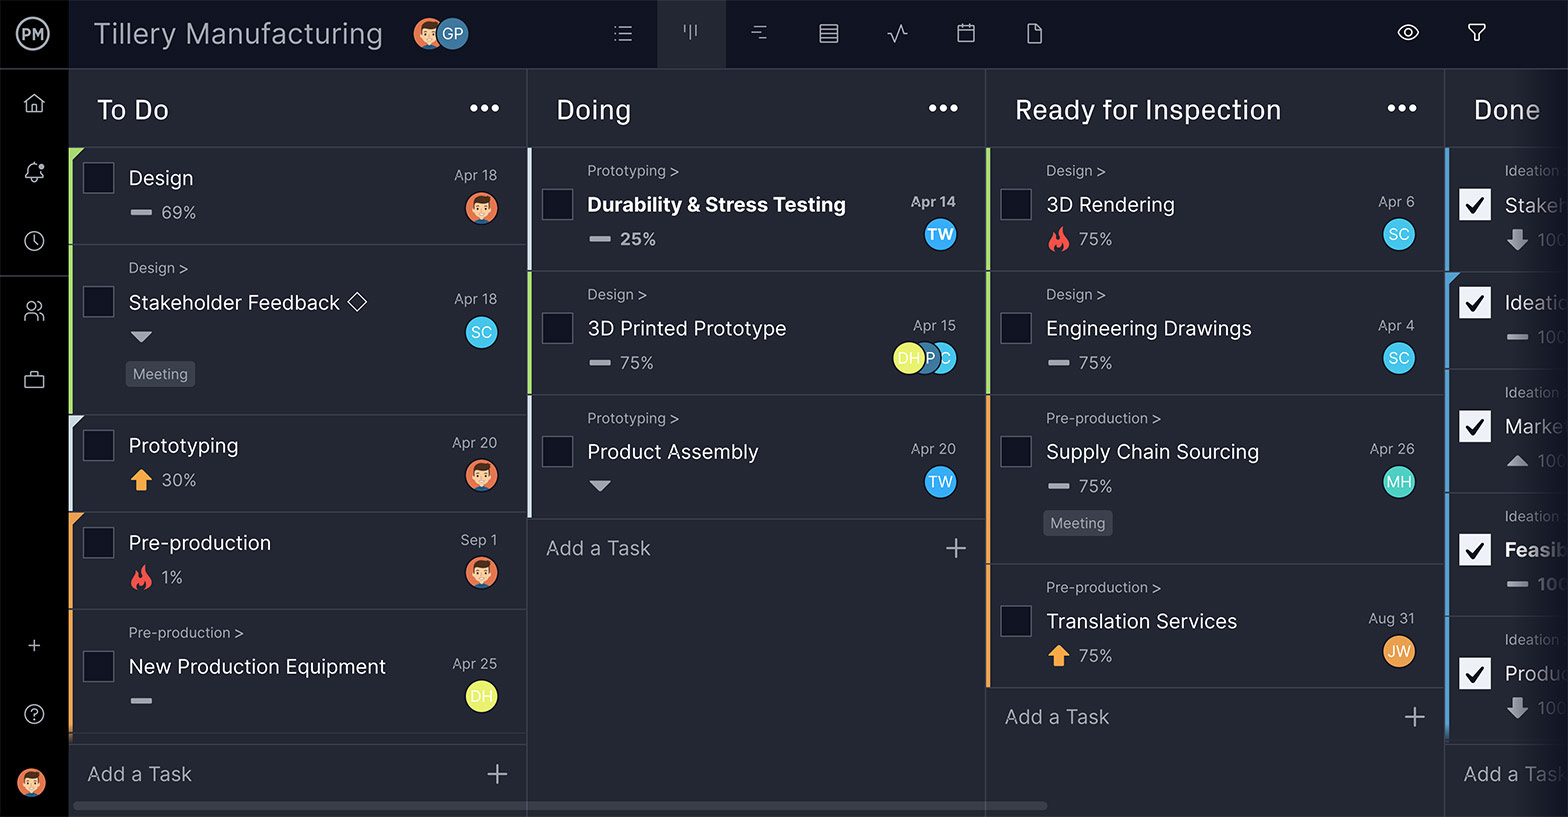 A screenshot of the Kanban board in ProjectManager, showing an agile project